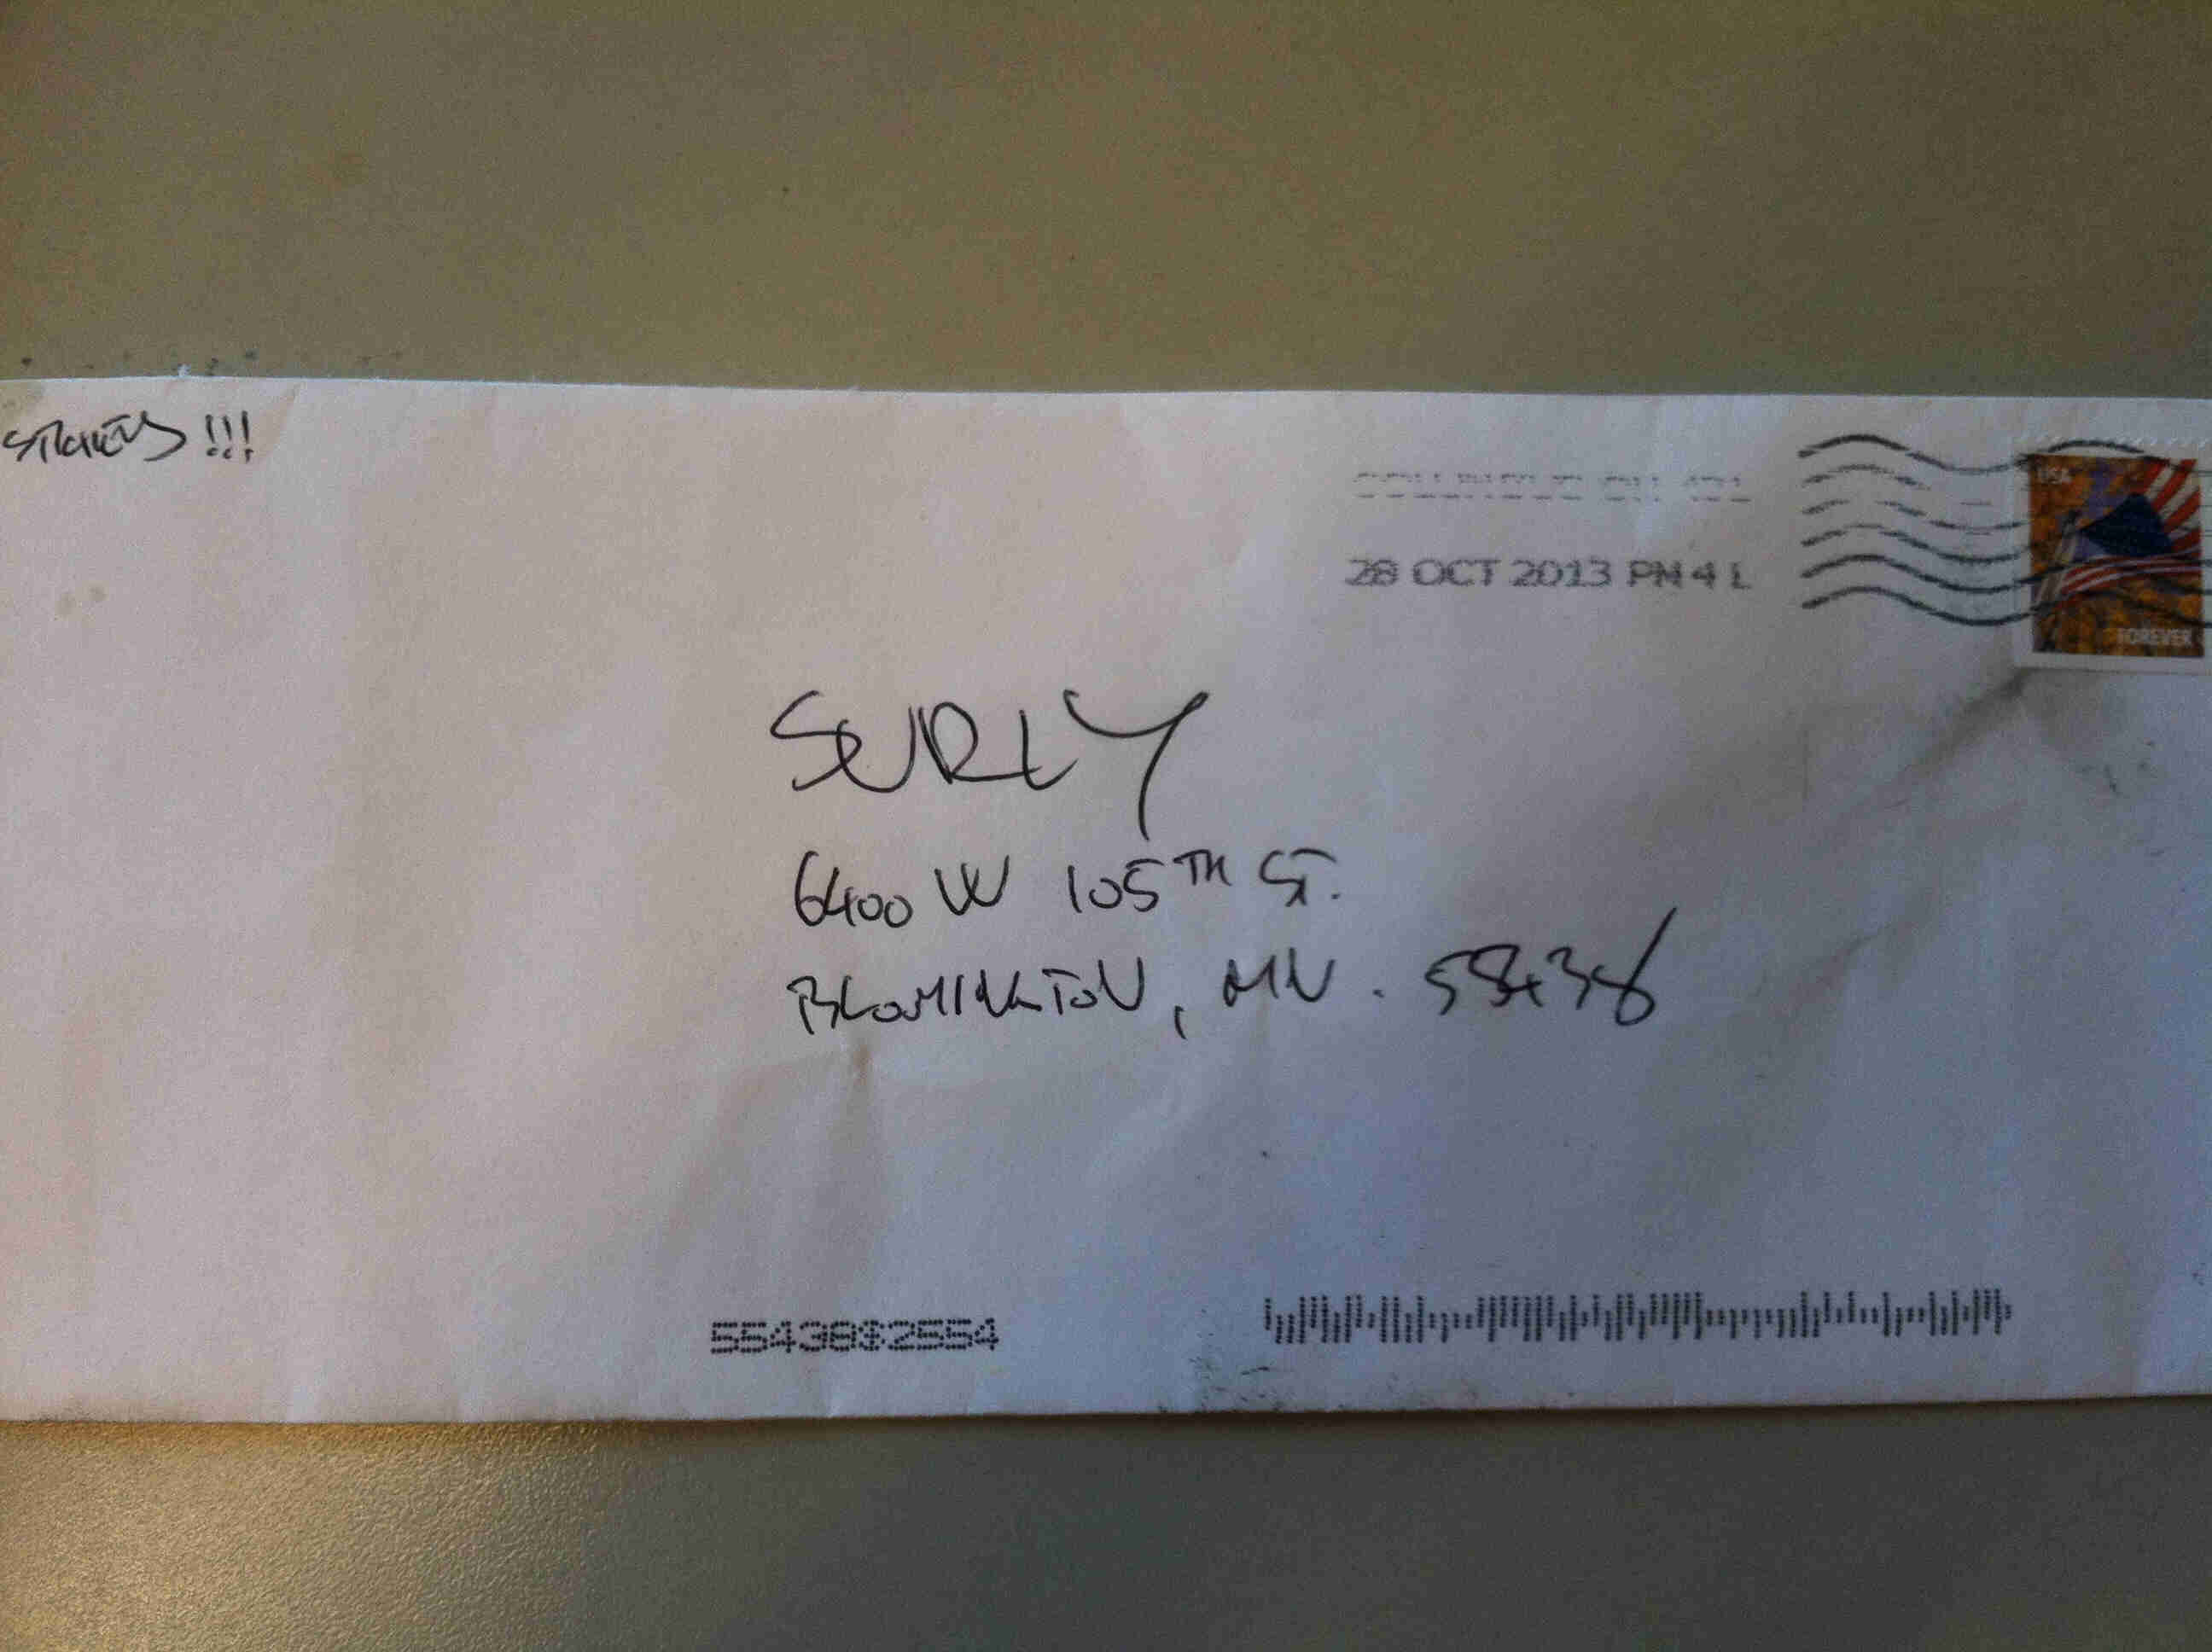 Horizontal view of outside of a white envelope, addressed to Surly, laying on a table top